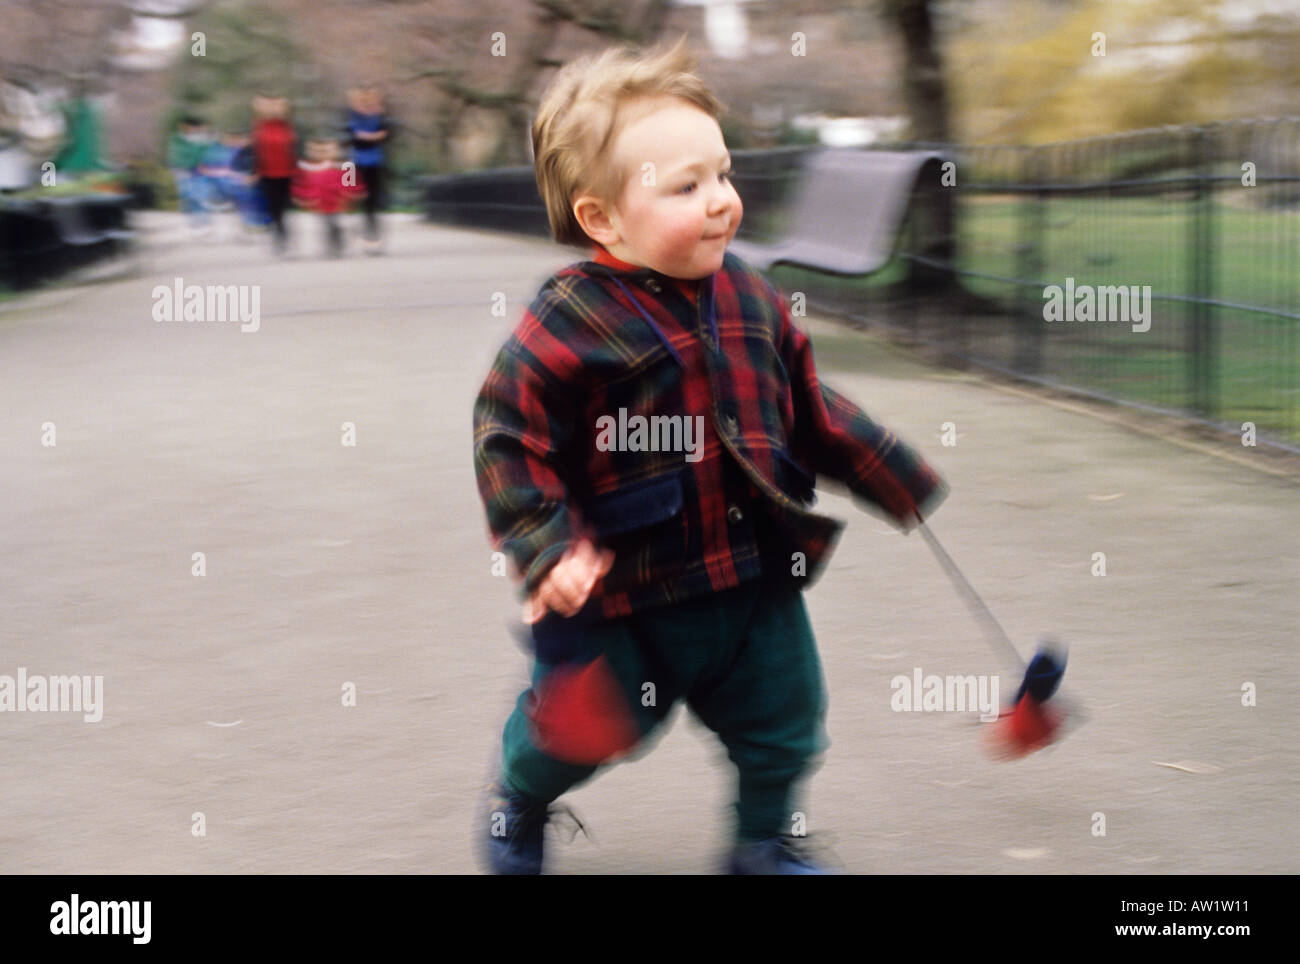 Two year old toddler boy running in park Stock Photo